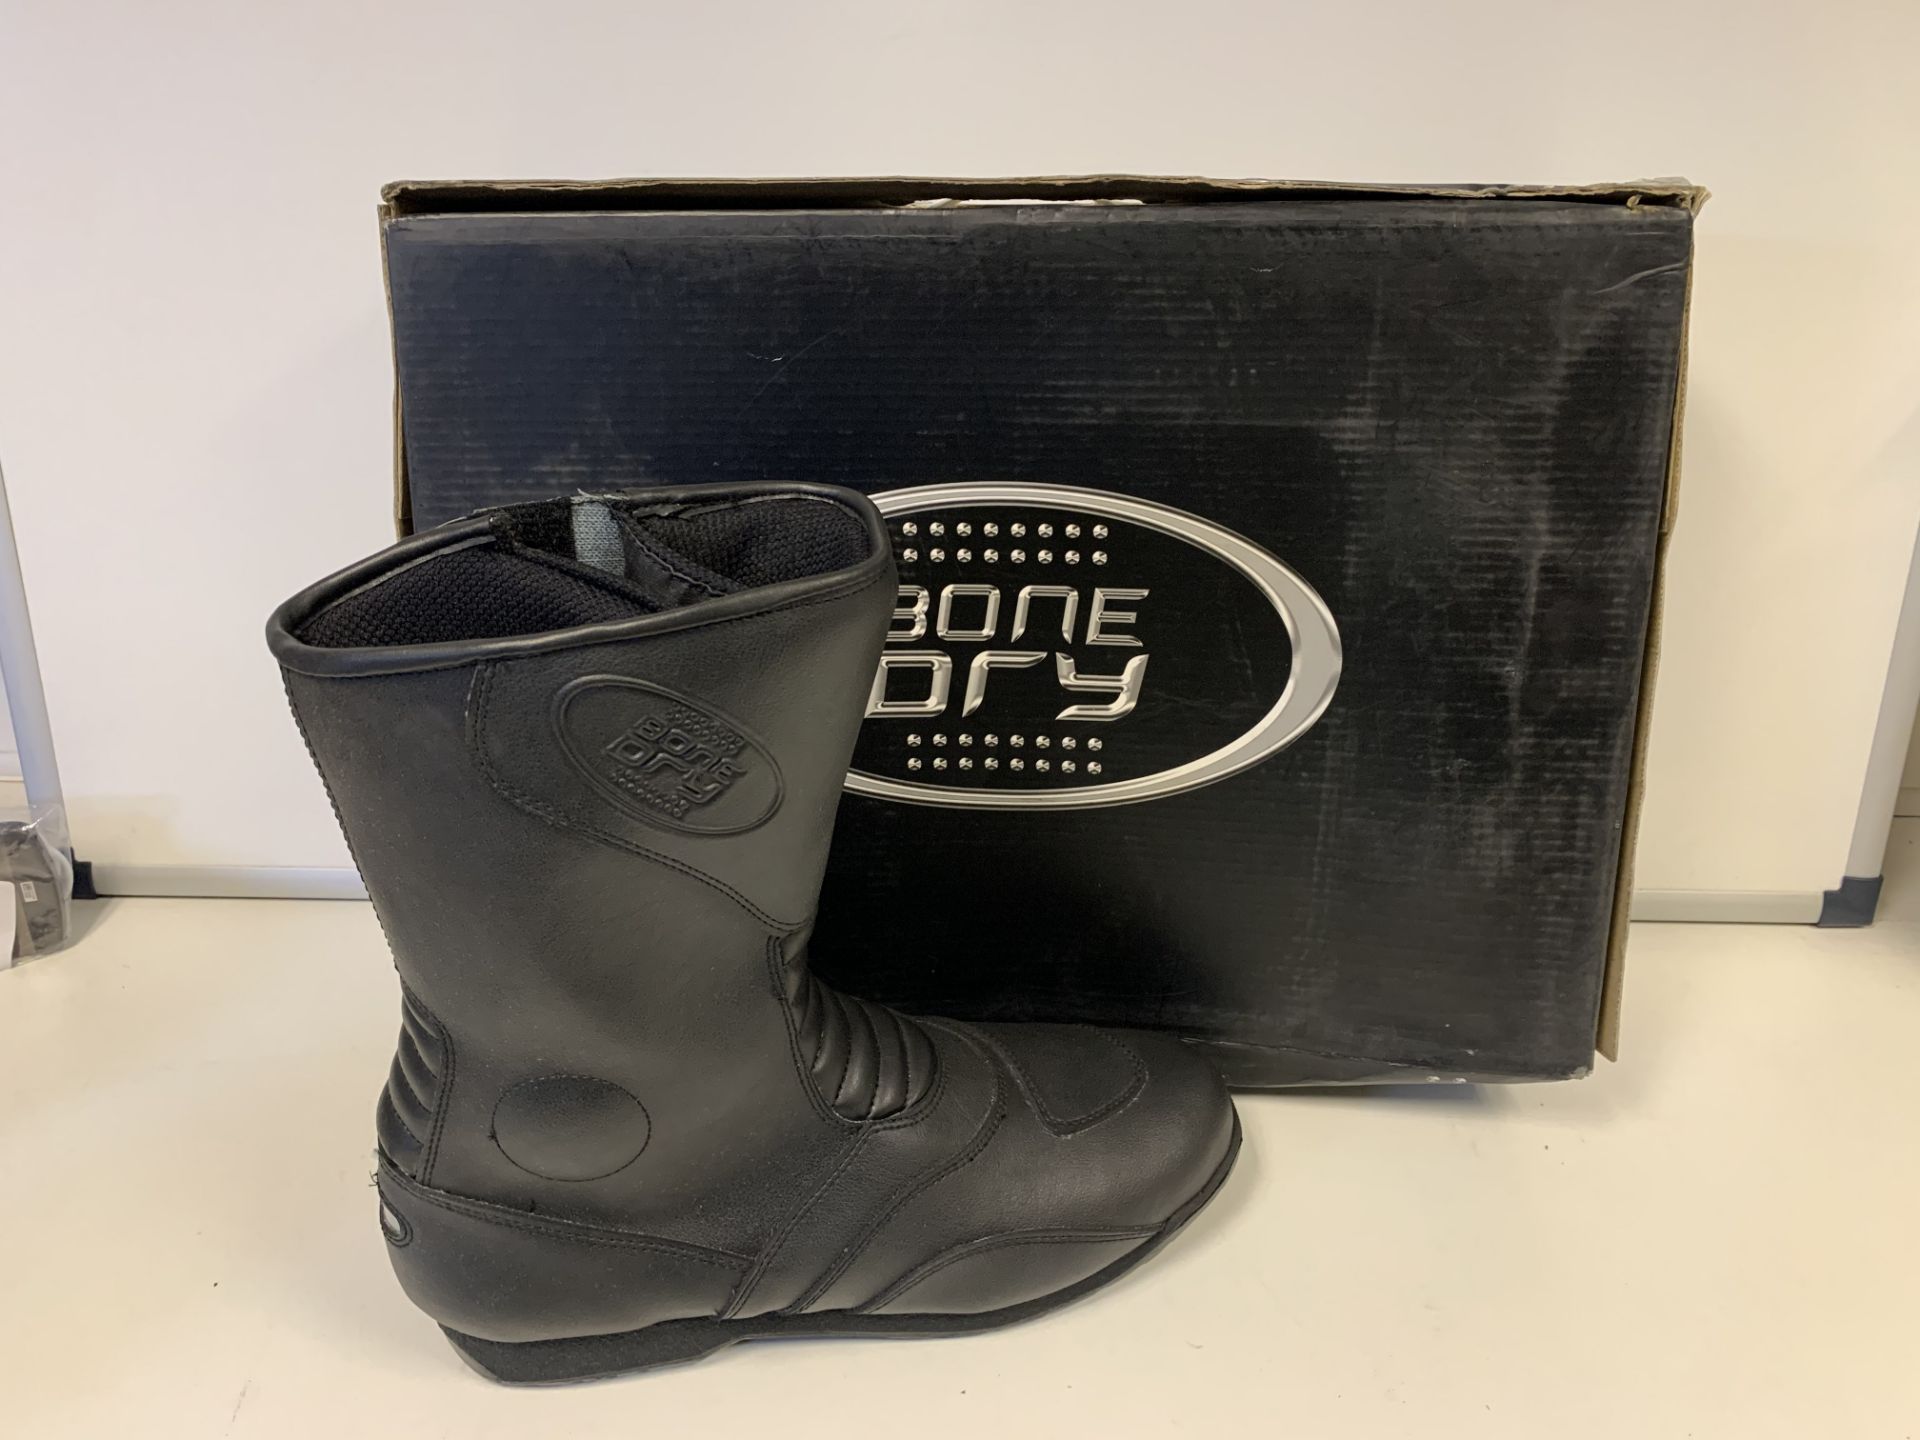 2 X BRAND NEW BOXED BONE DRY BOOTS SIZE 10